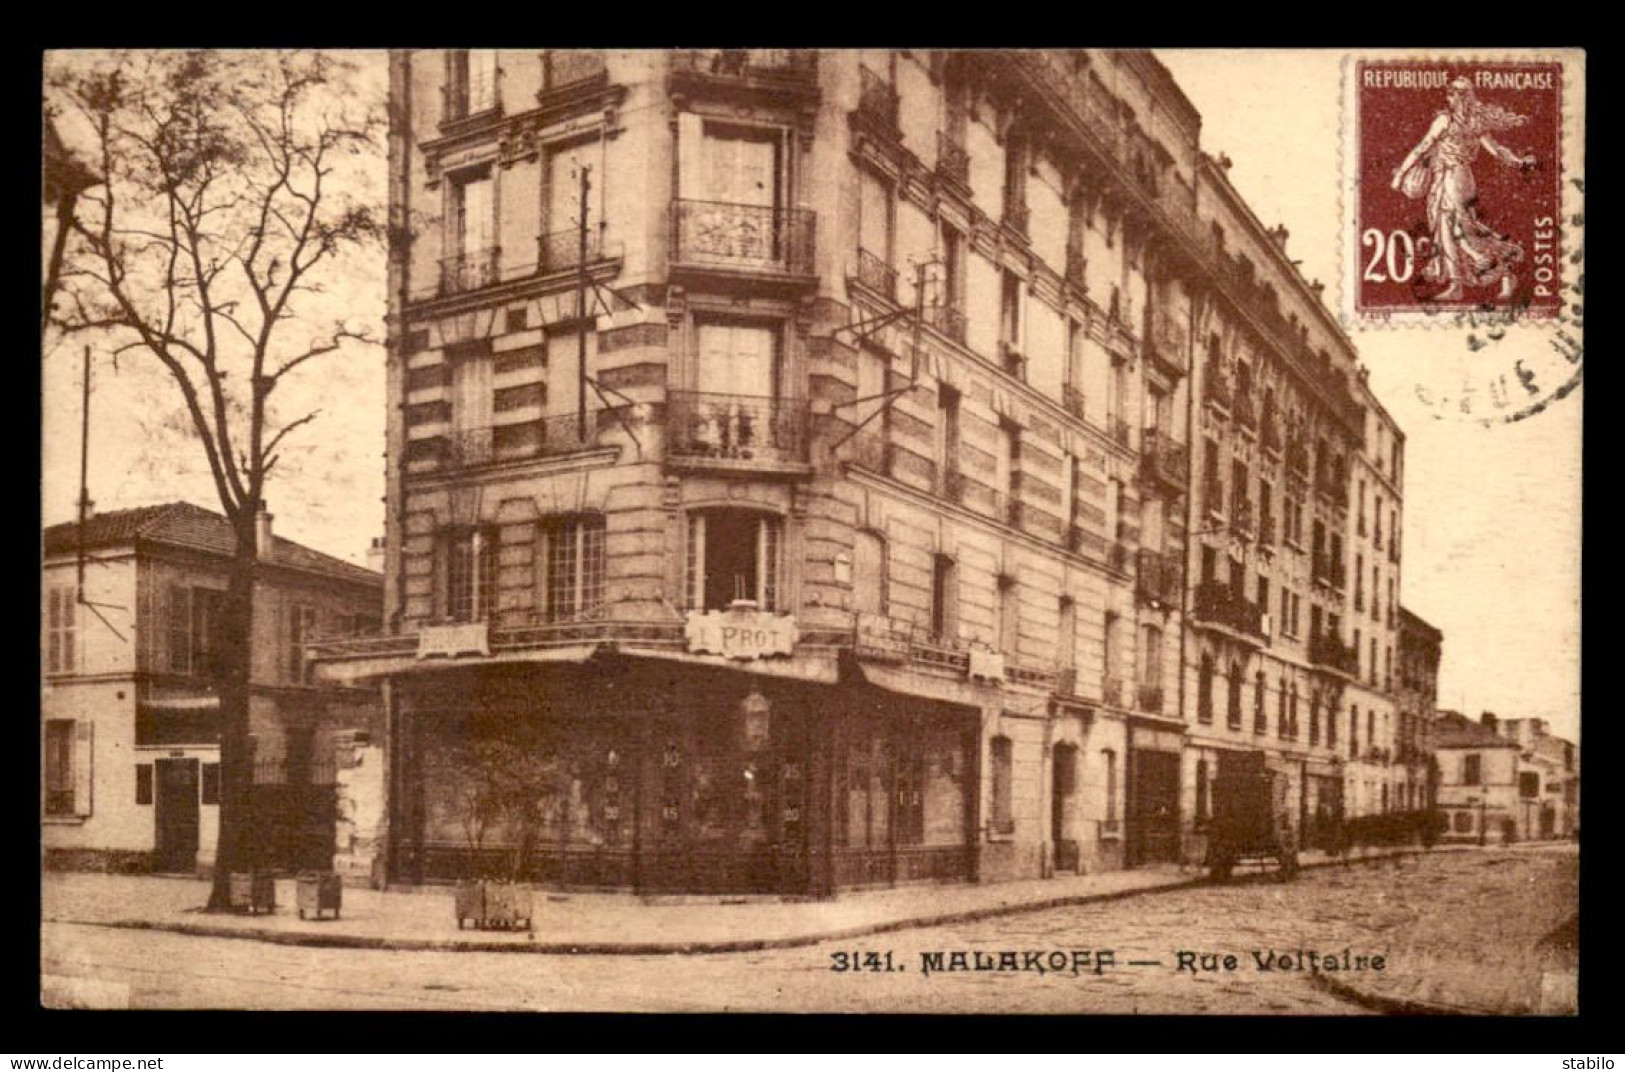 92 - MALAKOFF - RUE VOLTAIRE - BOULANGERIE L. PROT - Malakoff